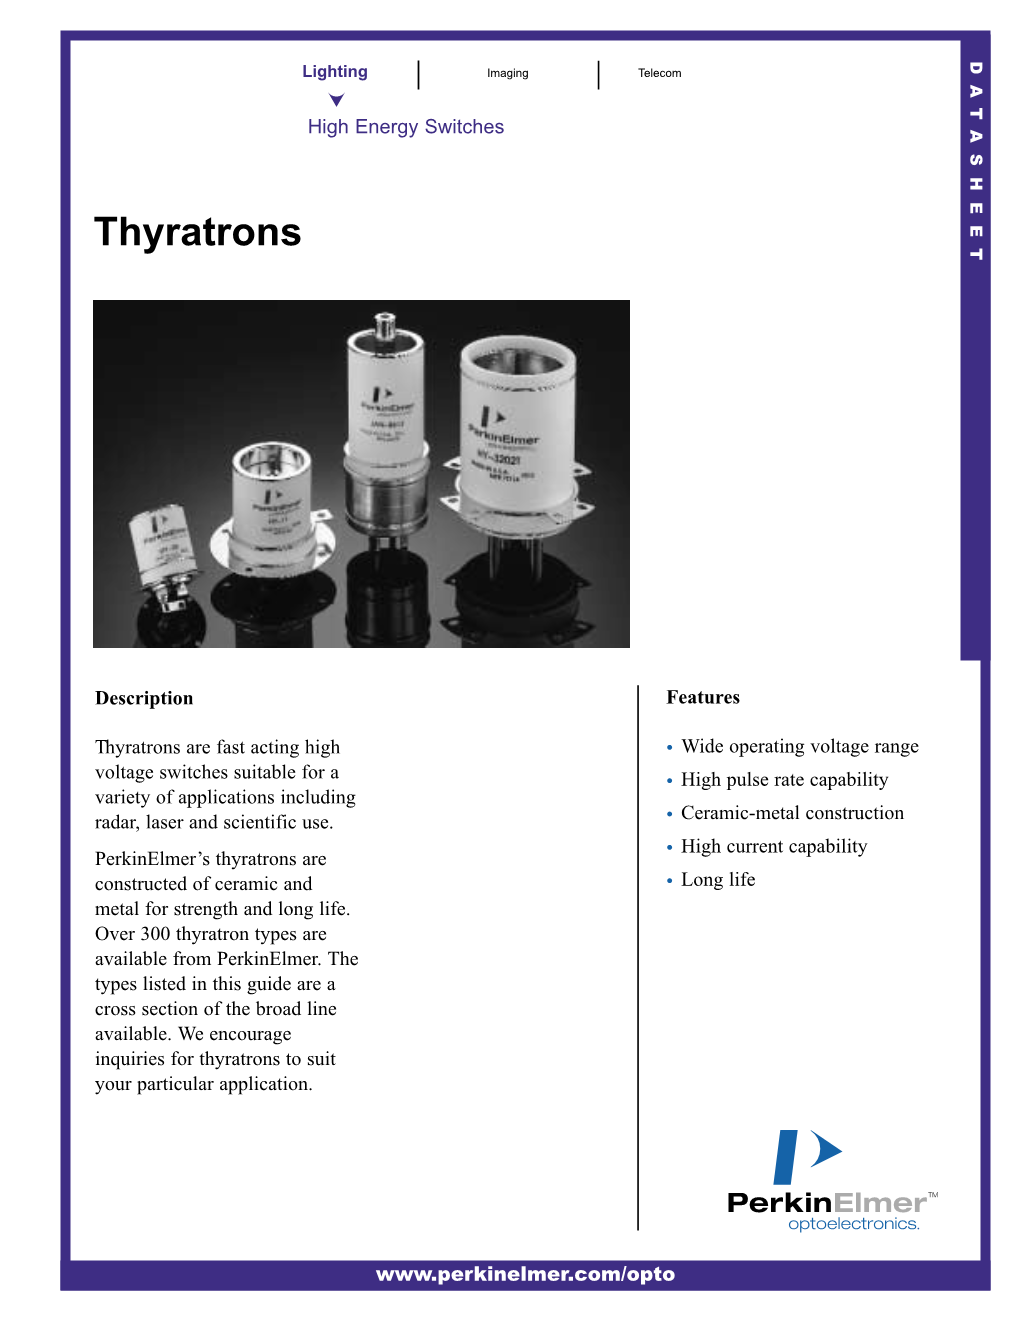 Thyratrons Are Perkinelmer’S Constructed of Ceramic and Metal for Strength and Long Life